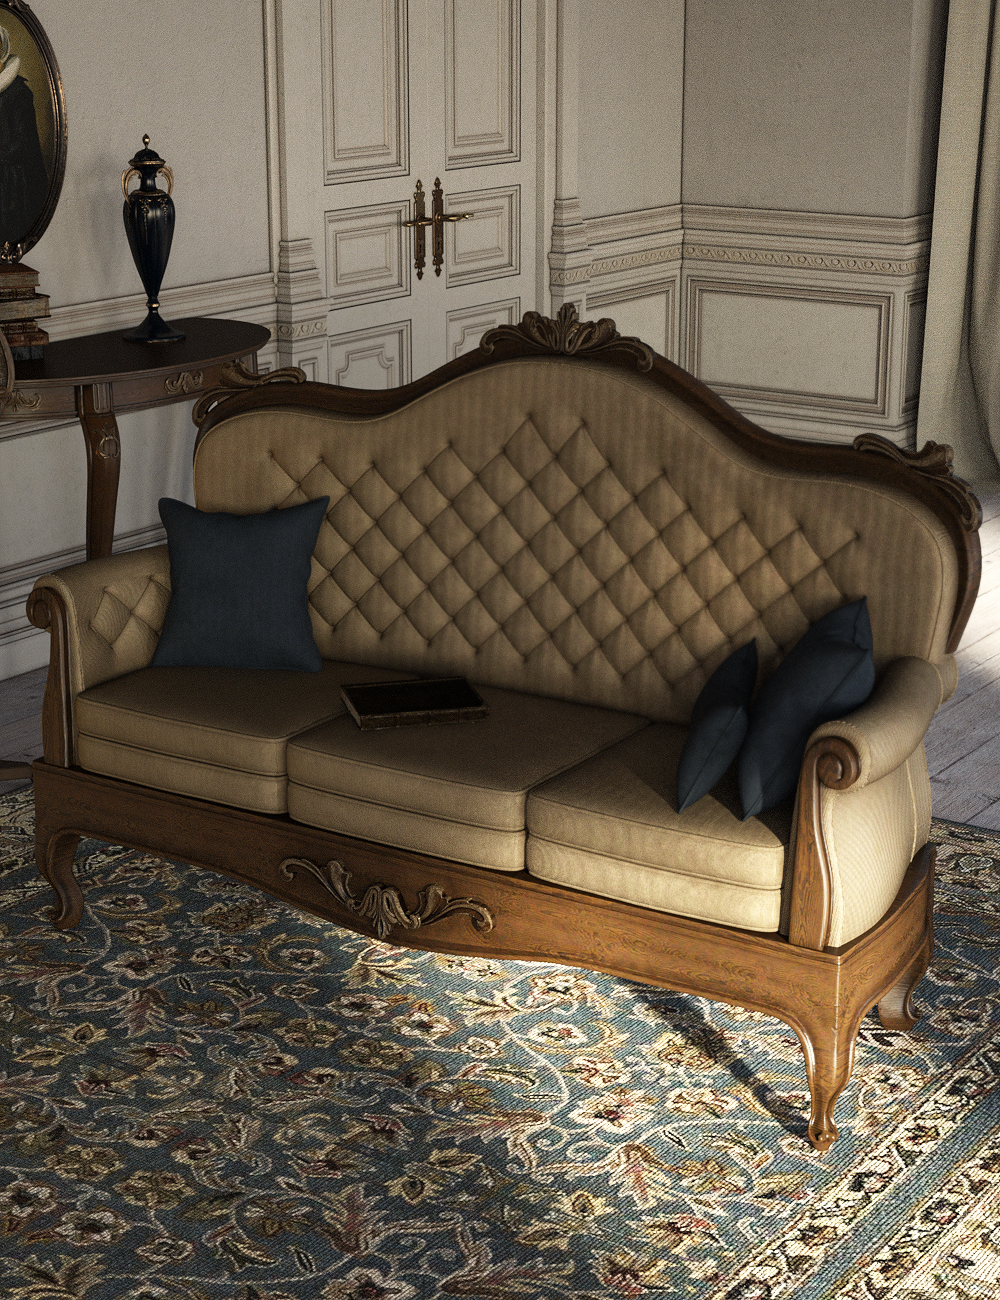 Victorian Decor 3 Iray by: LaurieS, 3D Models by Daz 3D